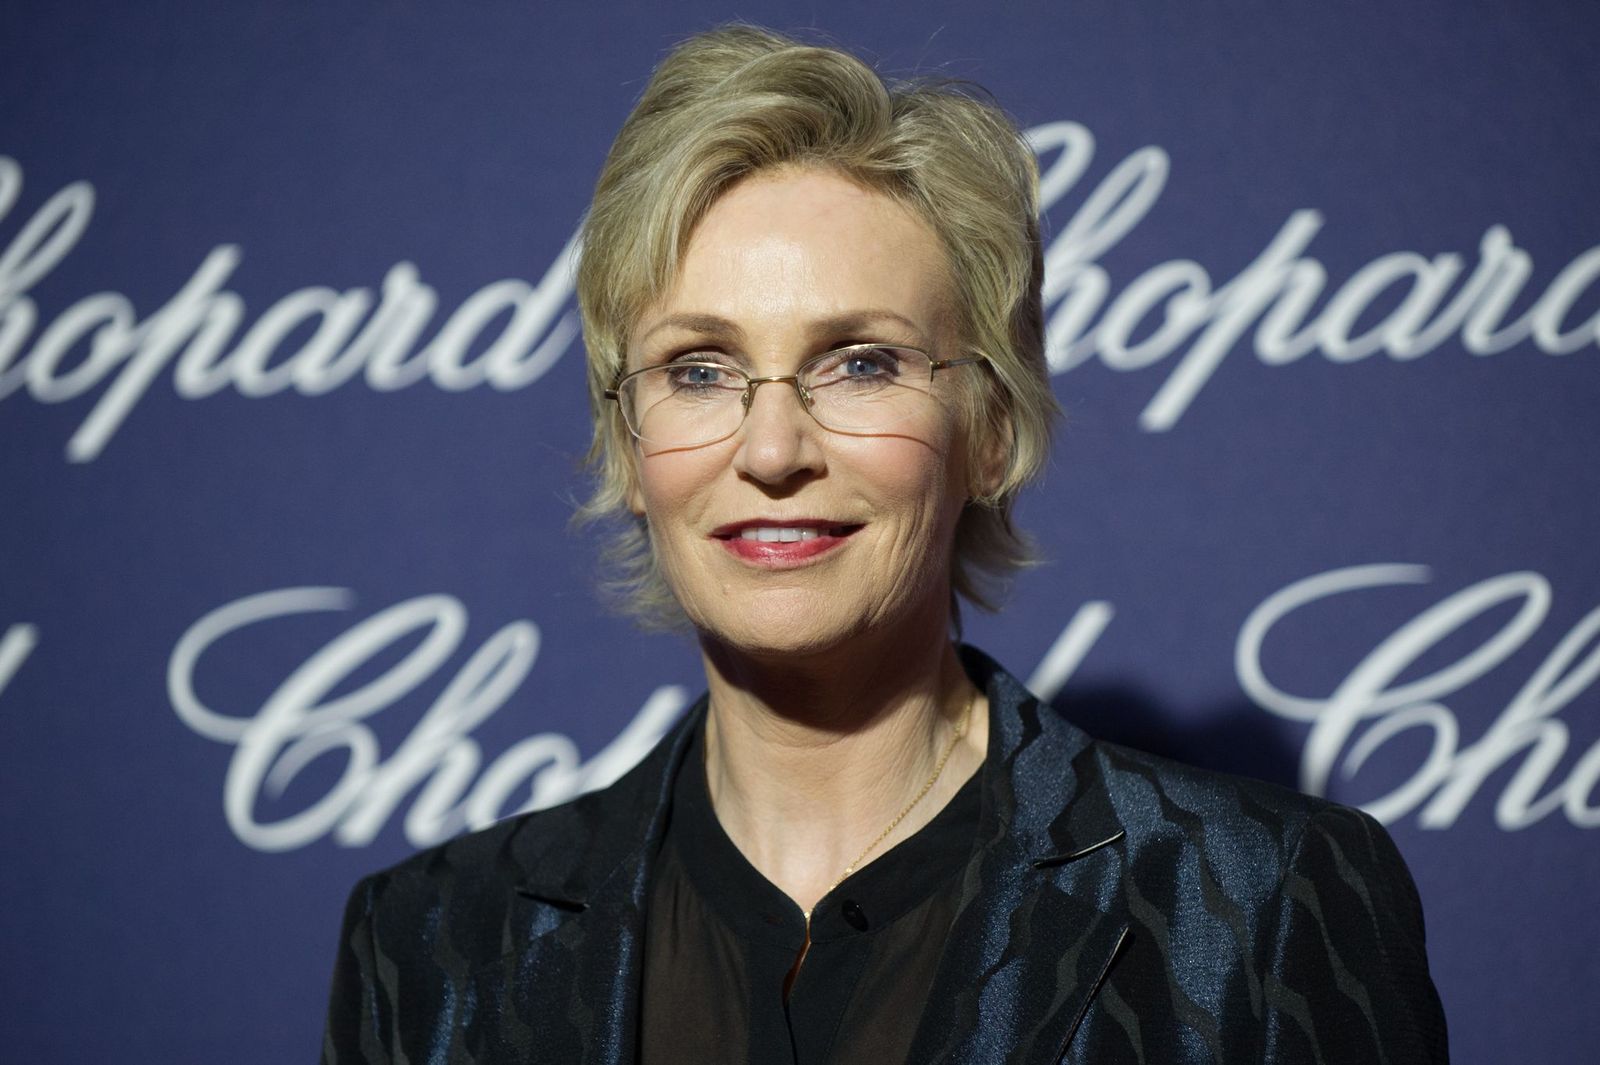 Jane Lynch at the 28th Annual Palm Springs International Film Festival Film Awards Gala on January 2, 2017, in Palm Springs, California | Photo: Emma McIntyre/Getty Images